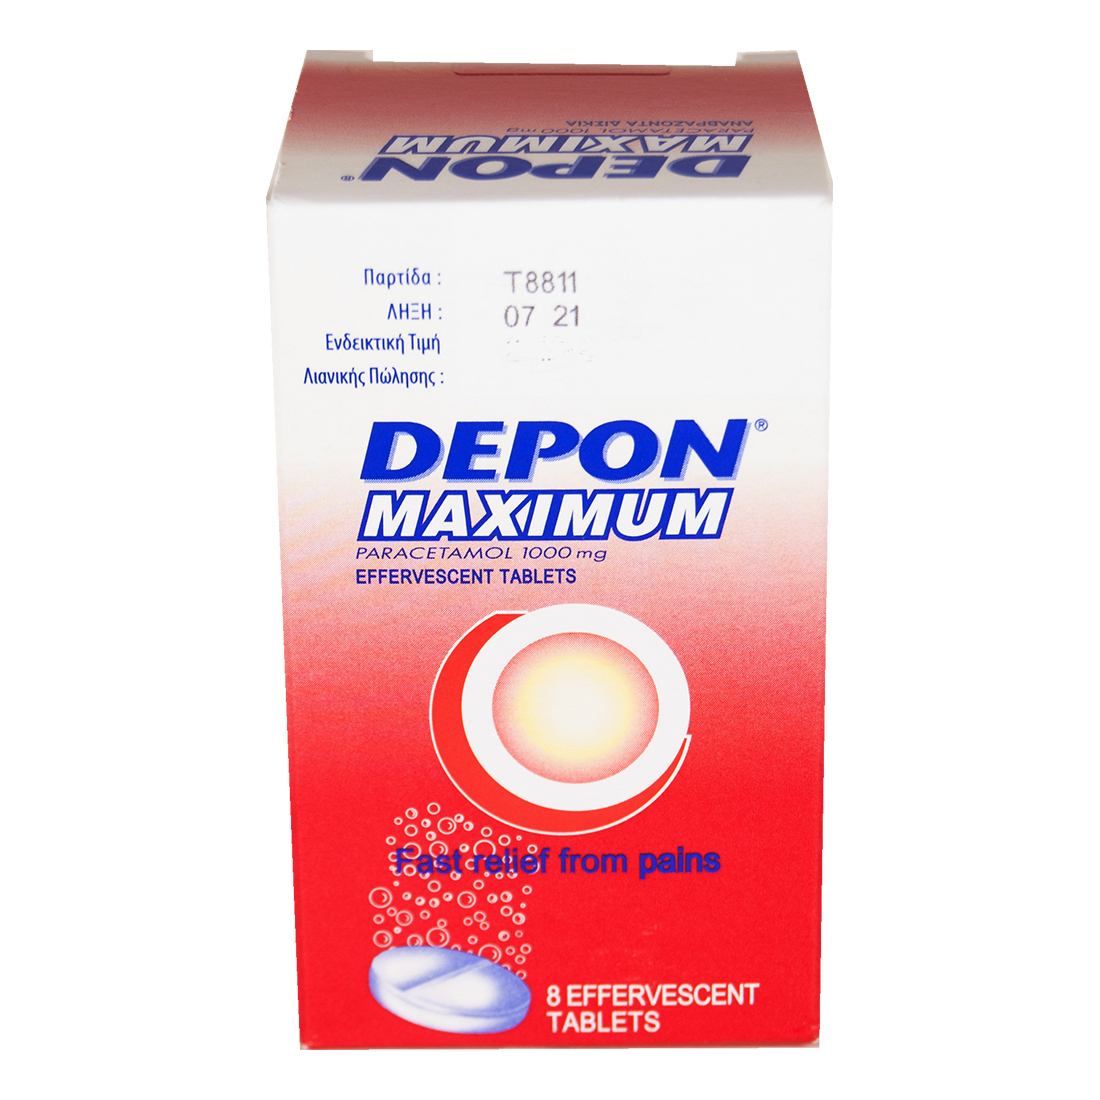 Primary image for DEPON MAXIMUM Paracetamol 1000mg 8 Effervescent Tablets 